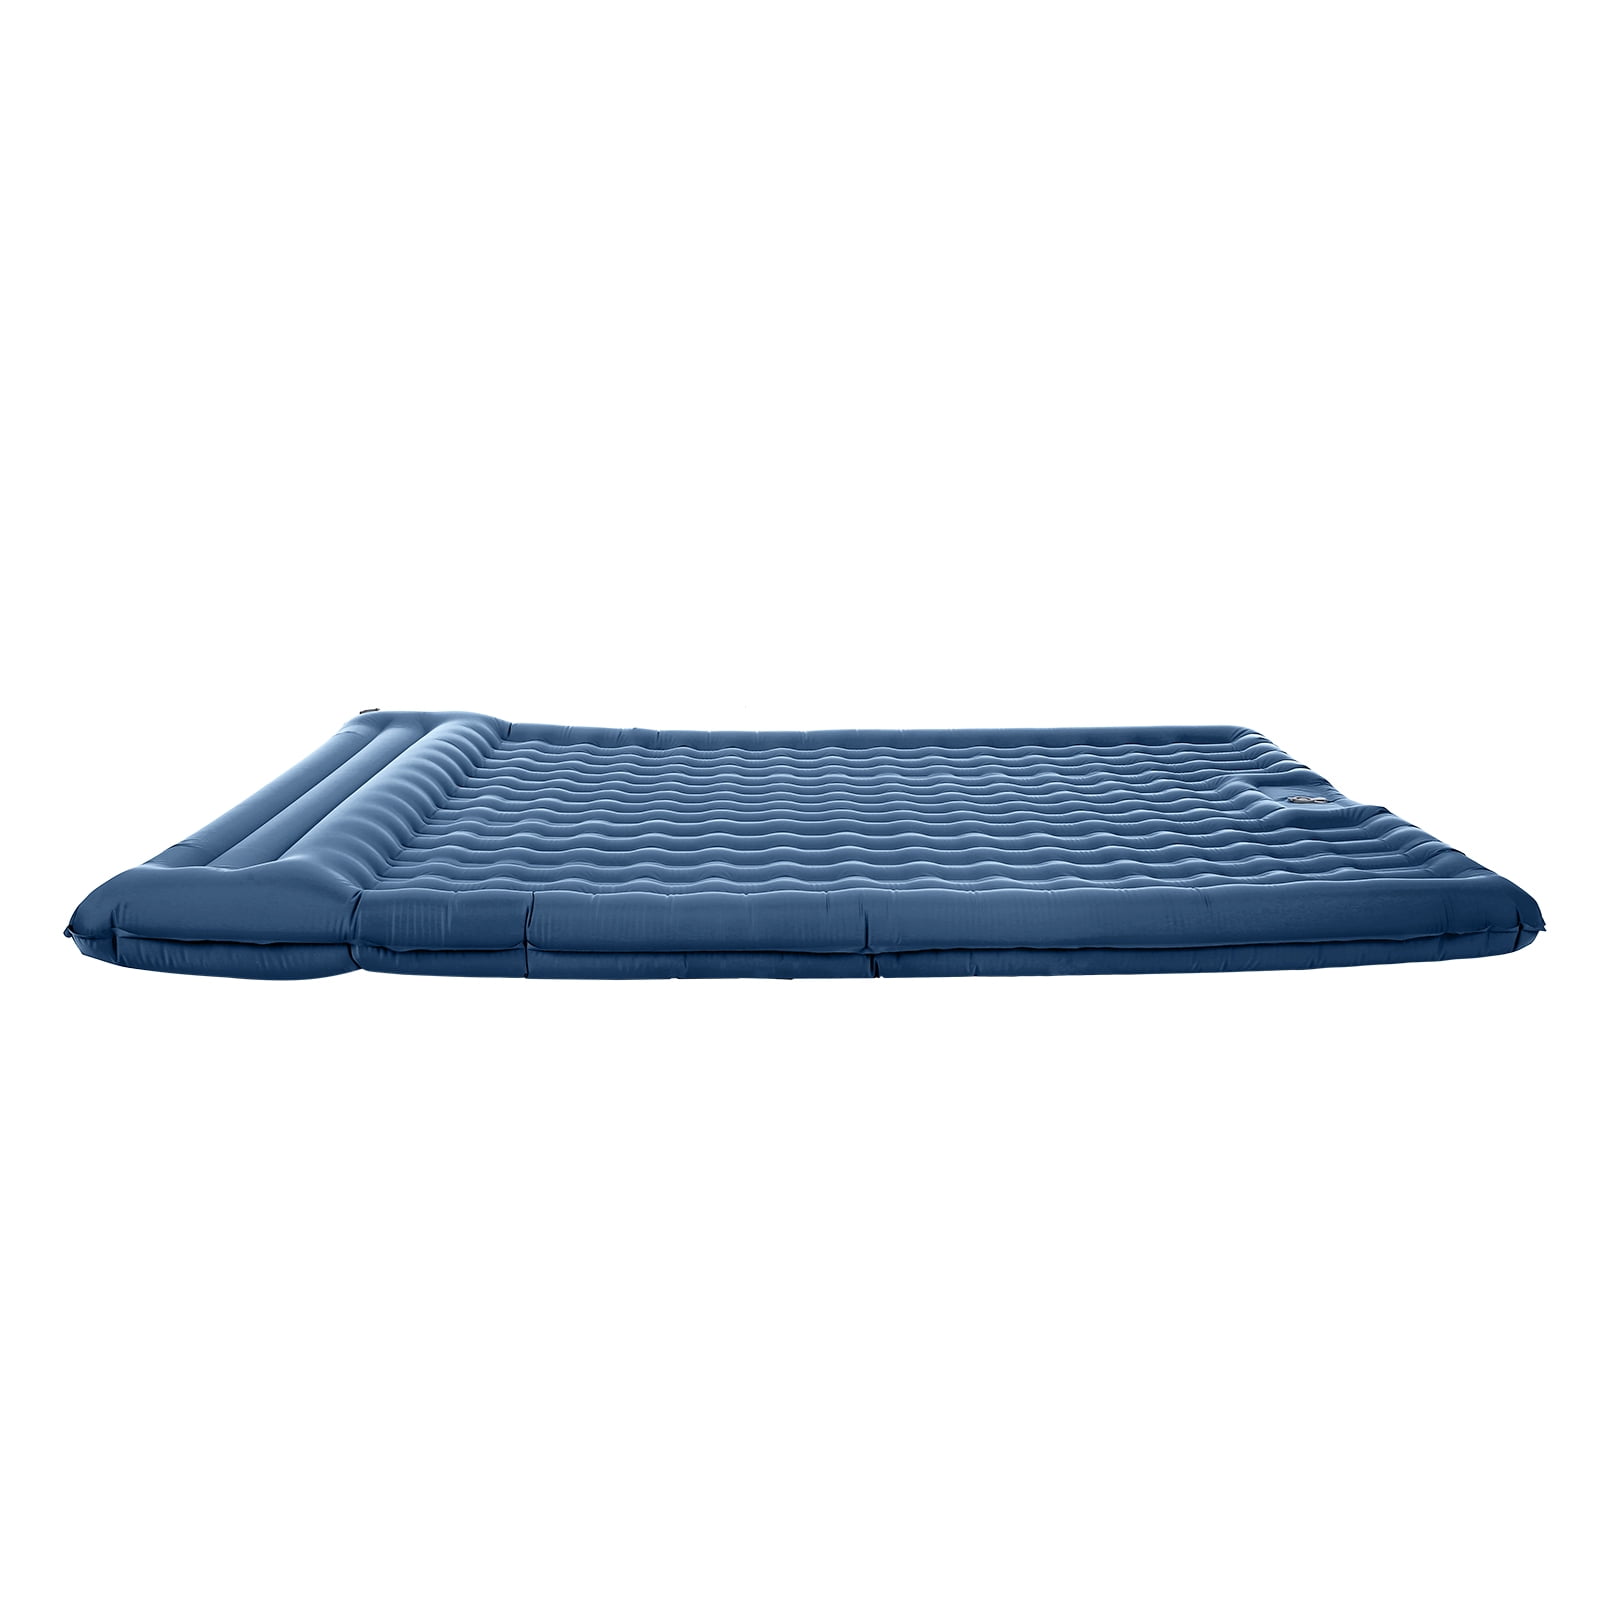 TOMSHOO Air Mattress with Built-in Pump, Extra Thick 5 Inch